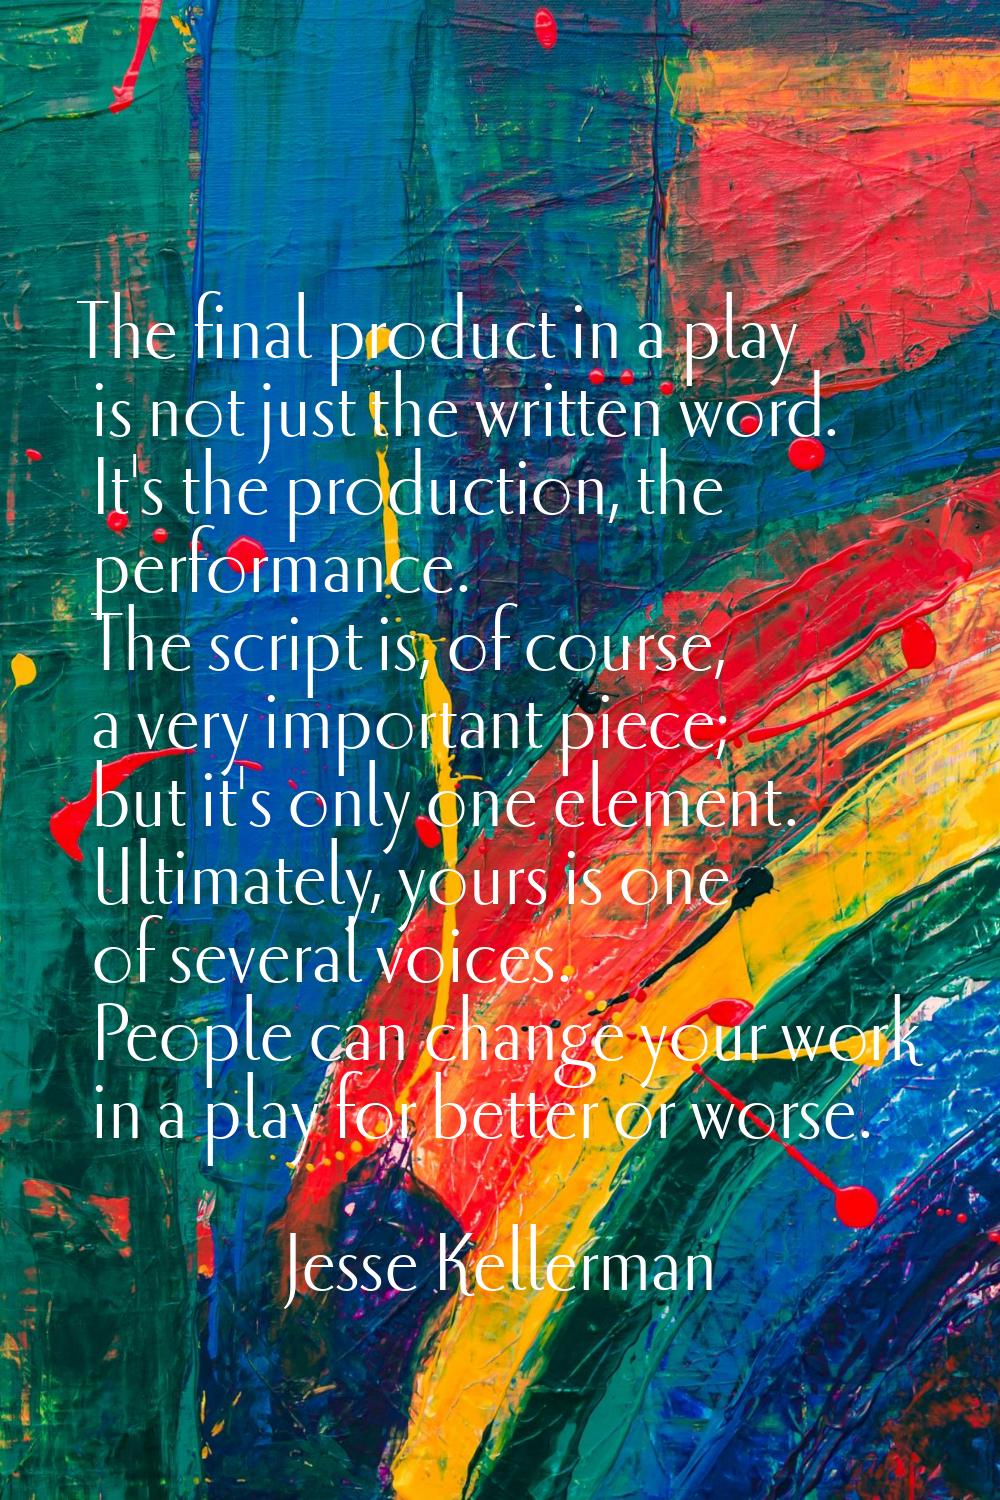 The final product in a play is not just the written word. It's the production, the performance. The